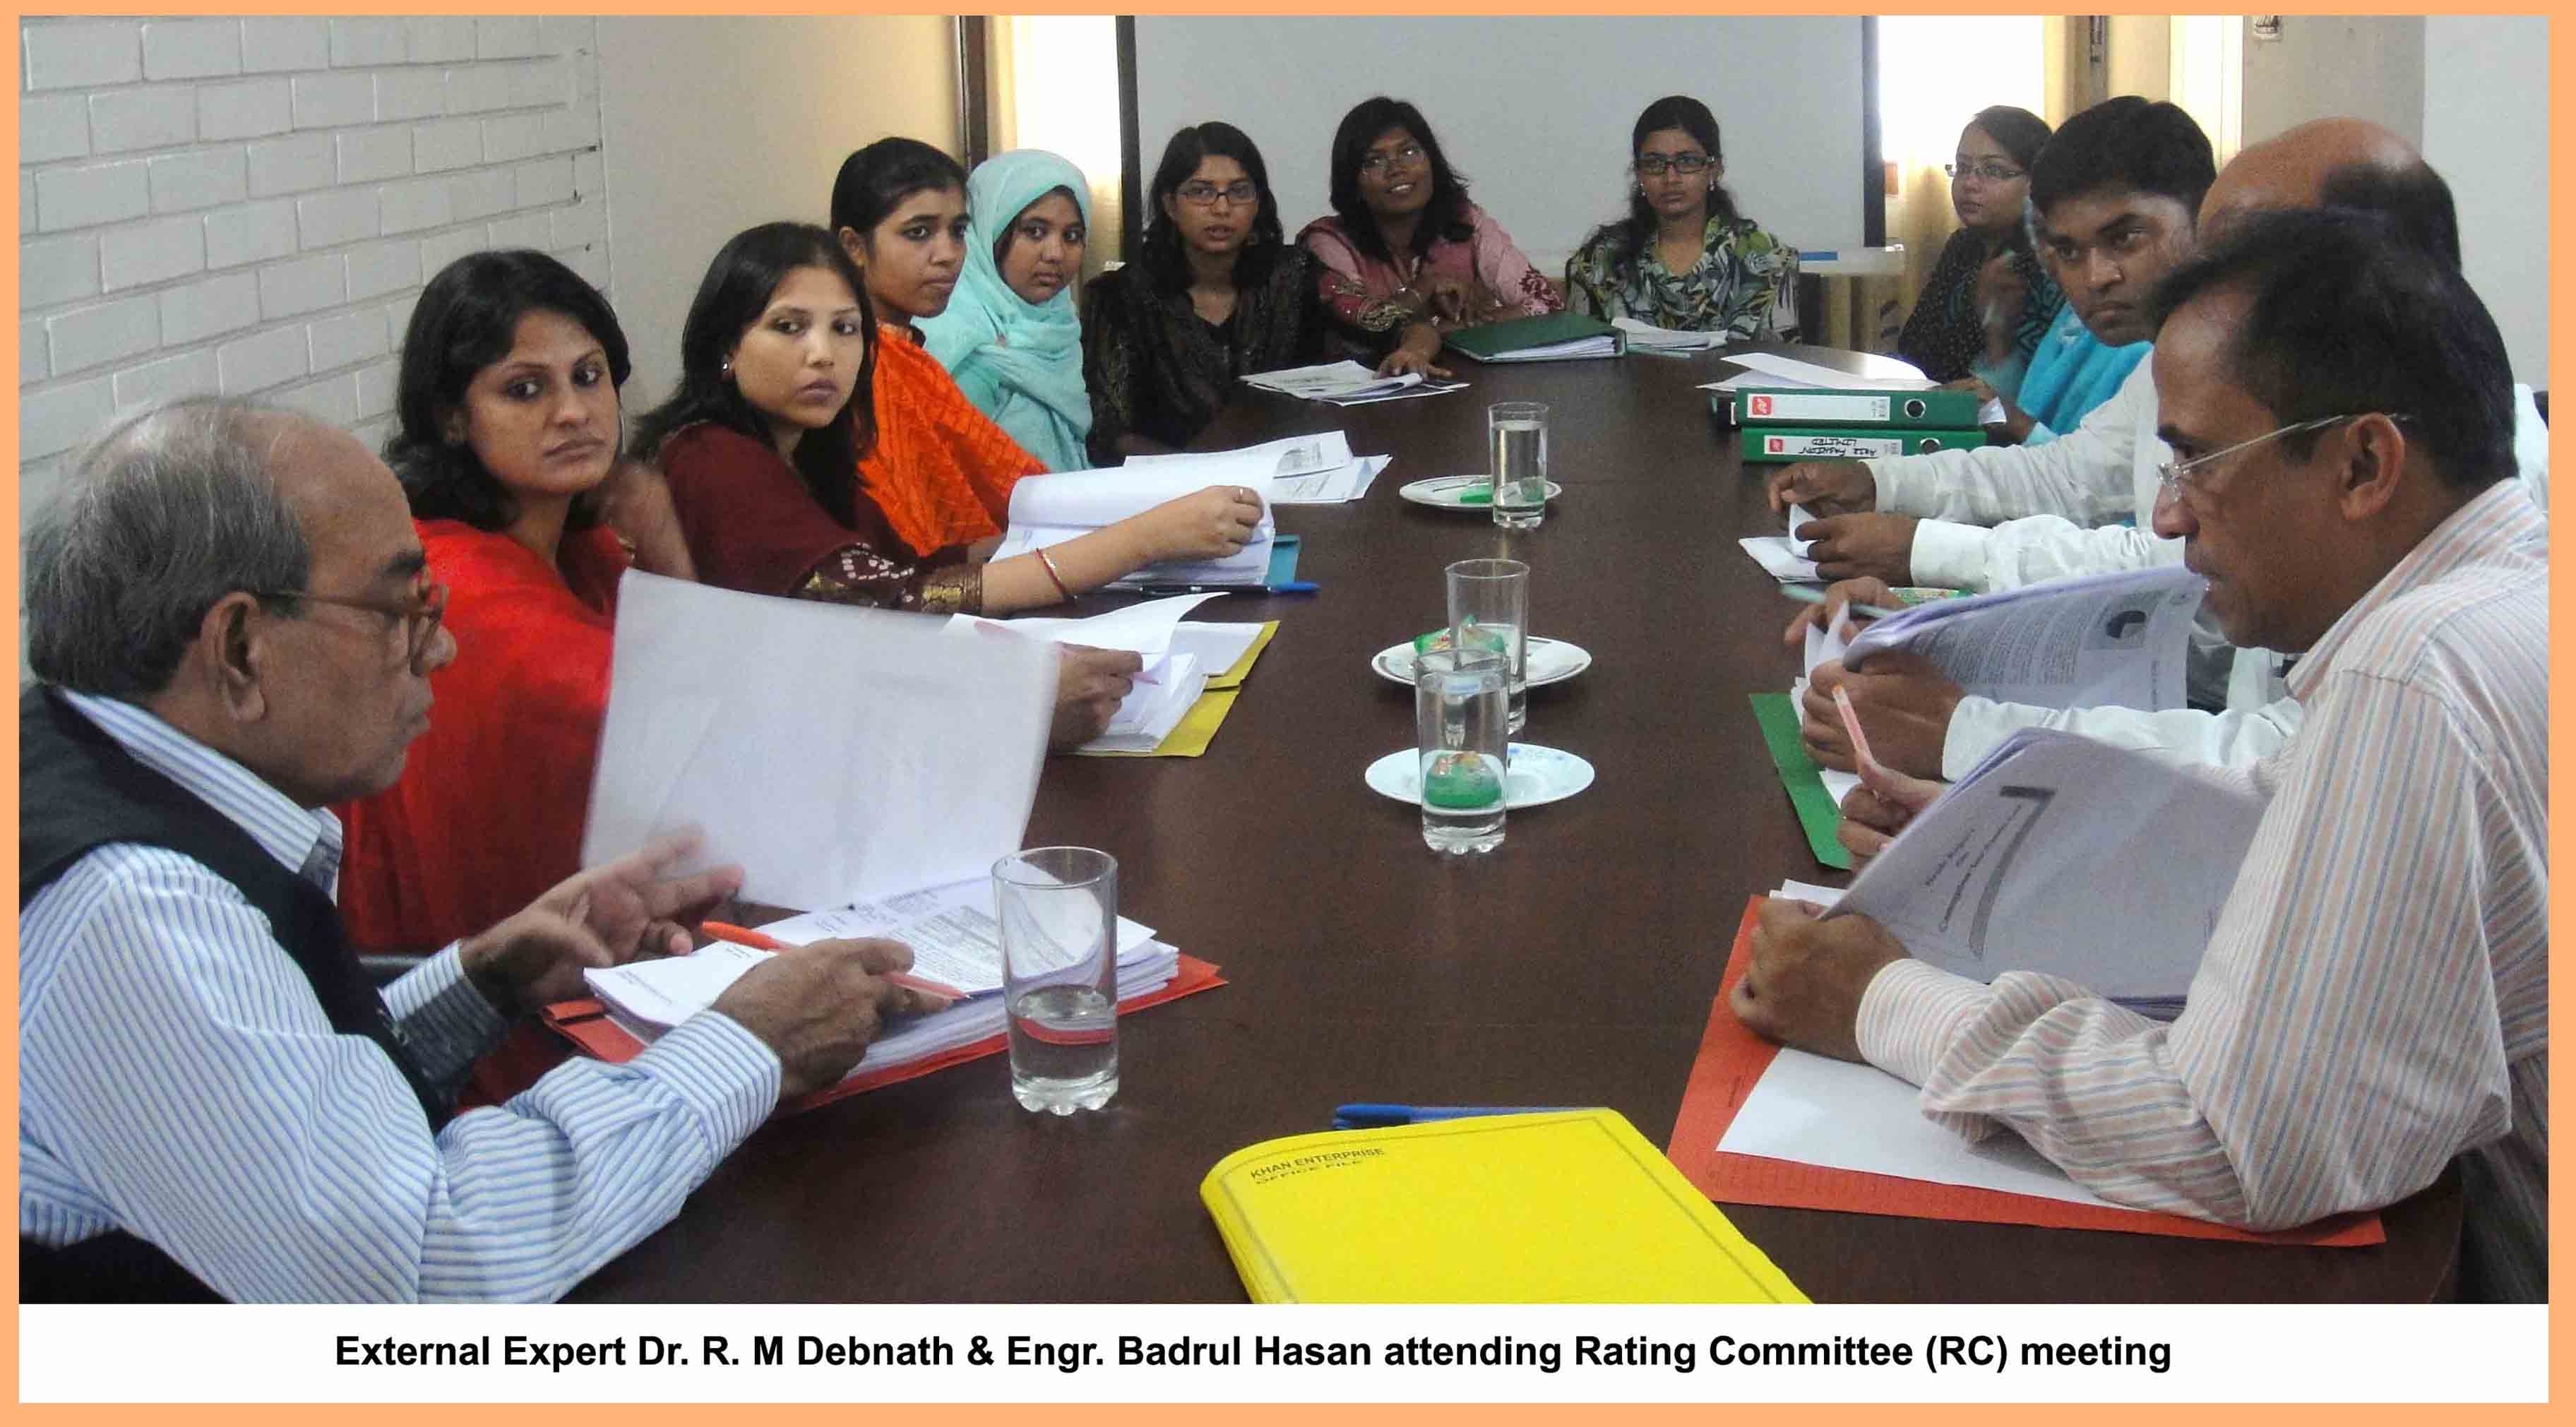 Rating Committee (RC) Meeting